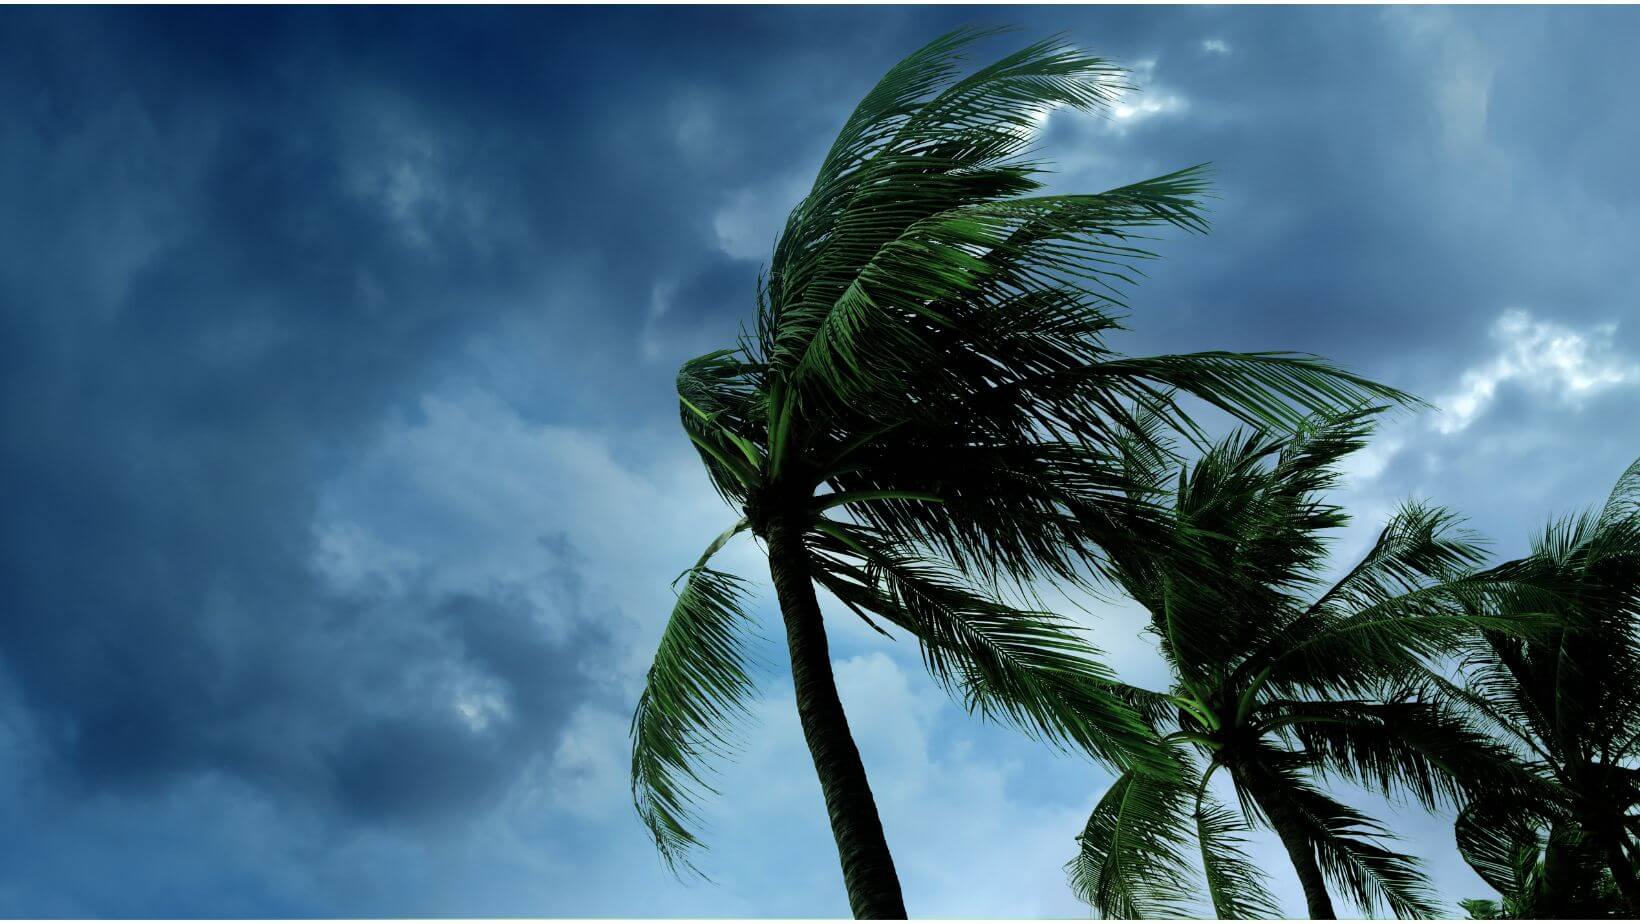 Dark skies and palm trees blowing in the wind before a storm.